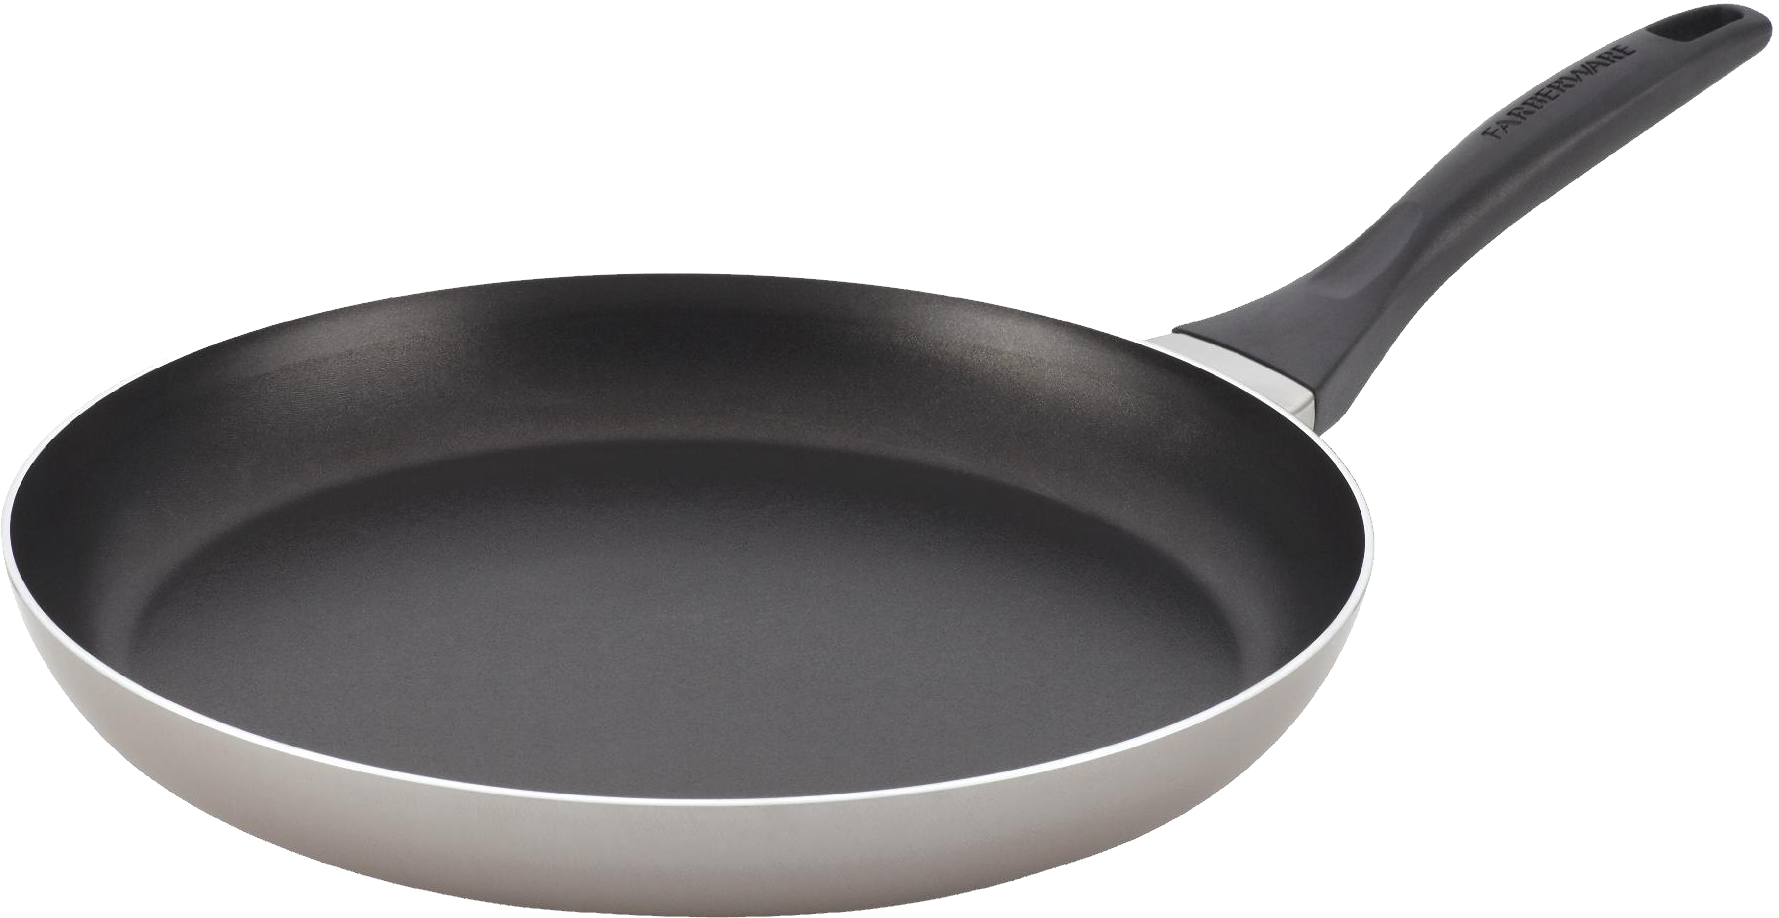 Steel Stainless Pan Frying Download HQ PNG Image